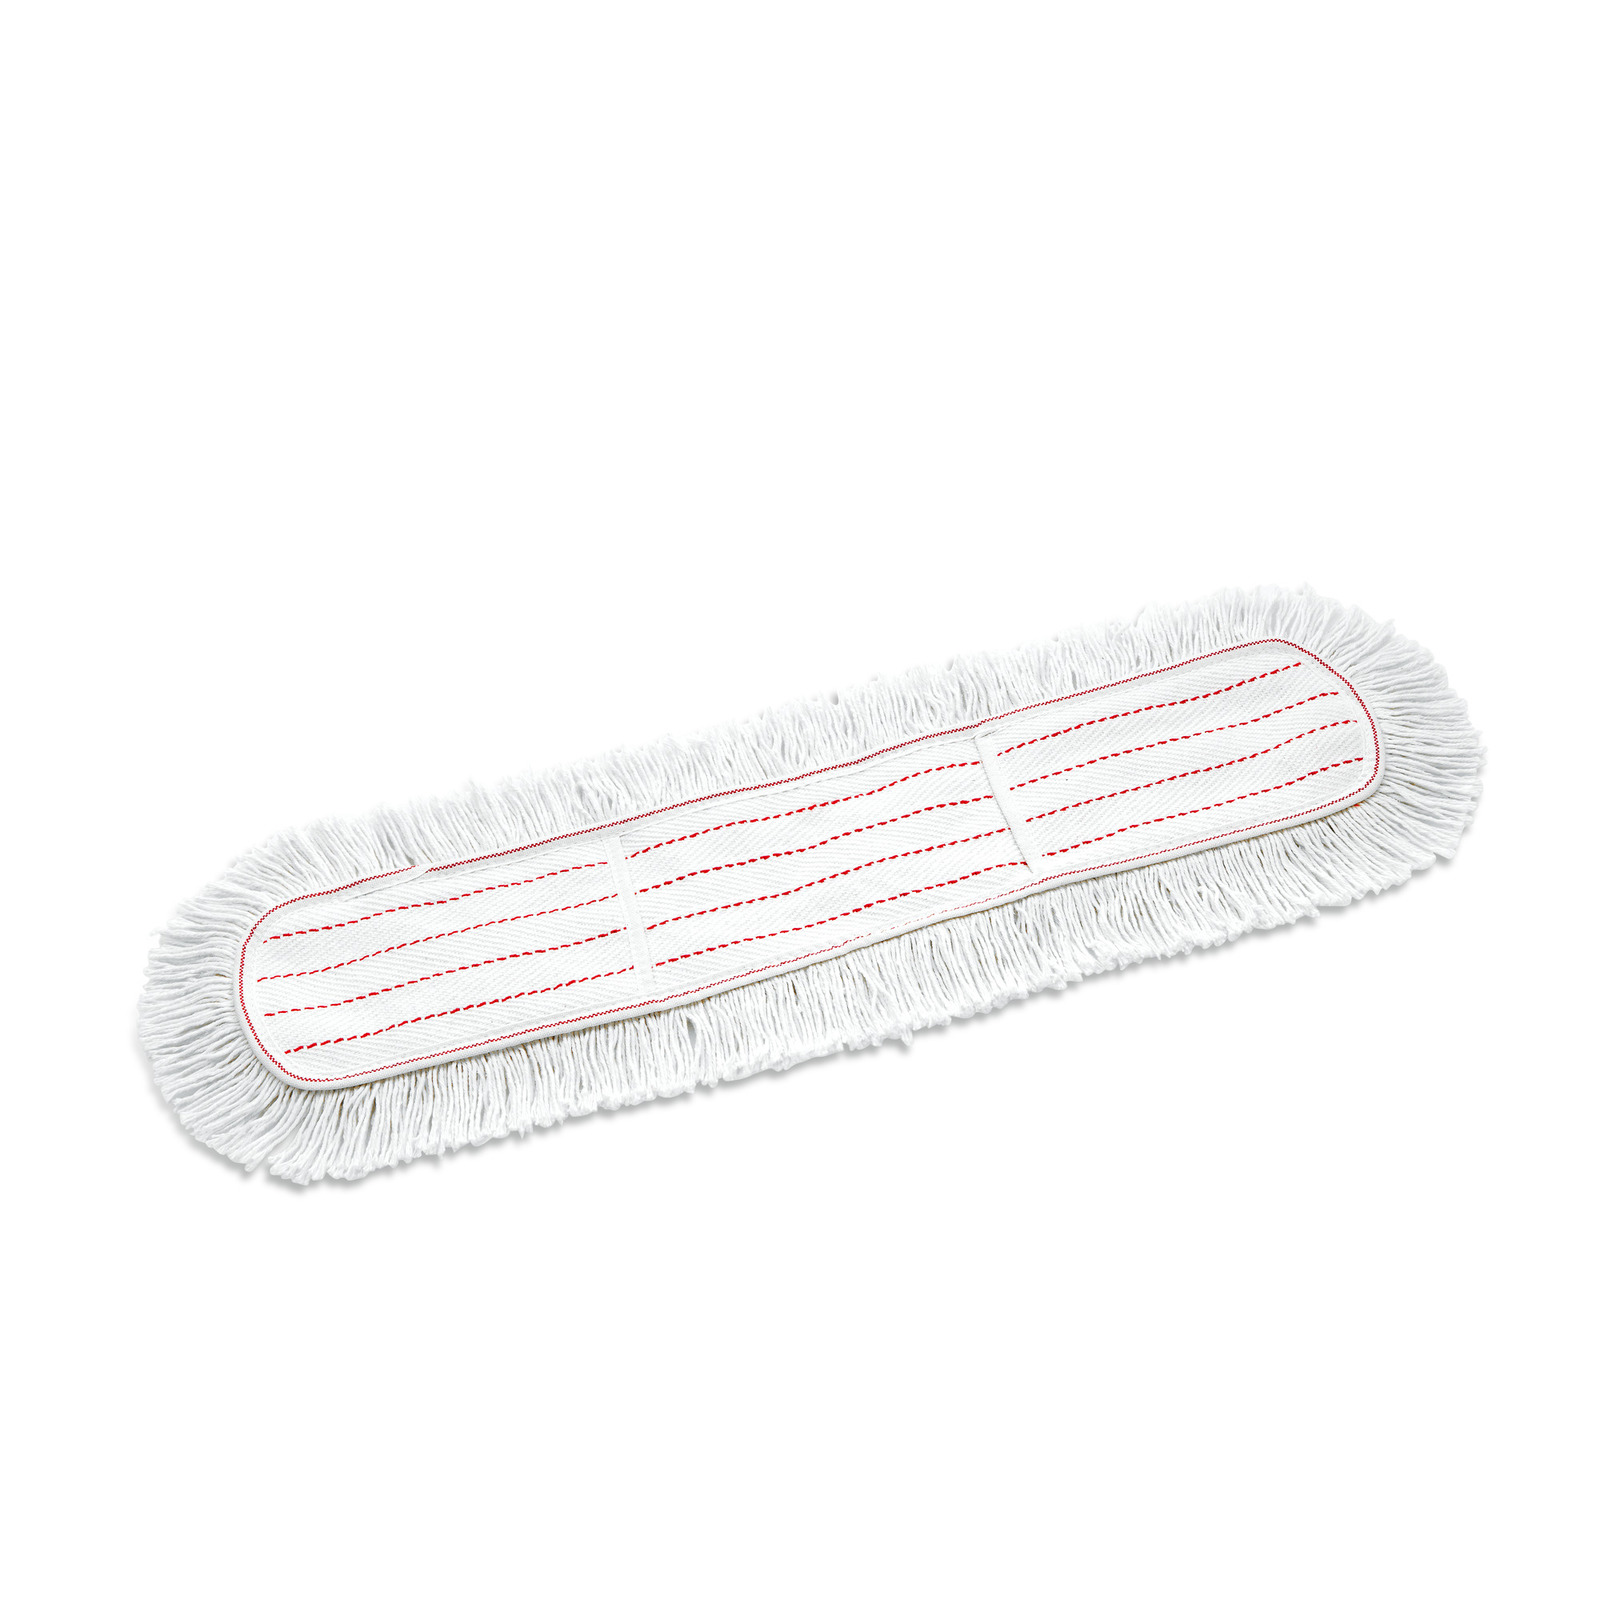 51 Stainless Steel Handle JR-MOV Commercial Cotton Dust Mop Metal Frame,Dust Mop for Clean Warehouse Hotel Company Factory Mall 32X5 Industrial Dust Mops for Hardwood Floor with 2 Cotton Pads 